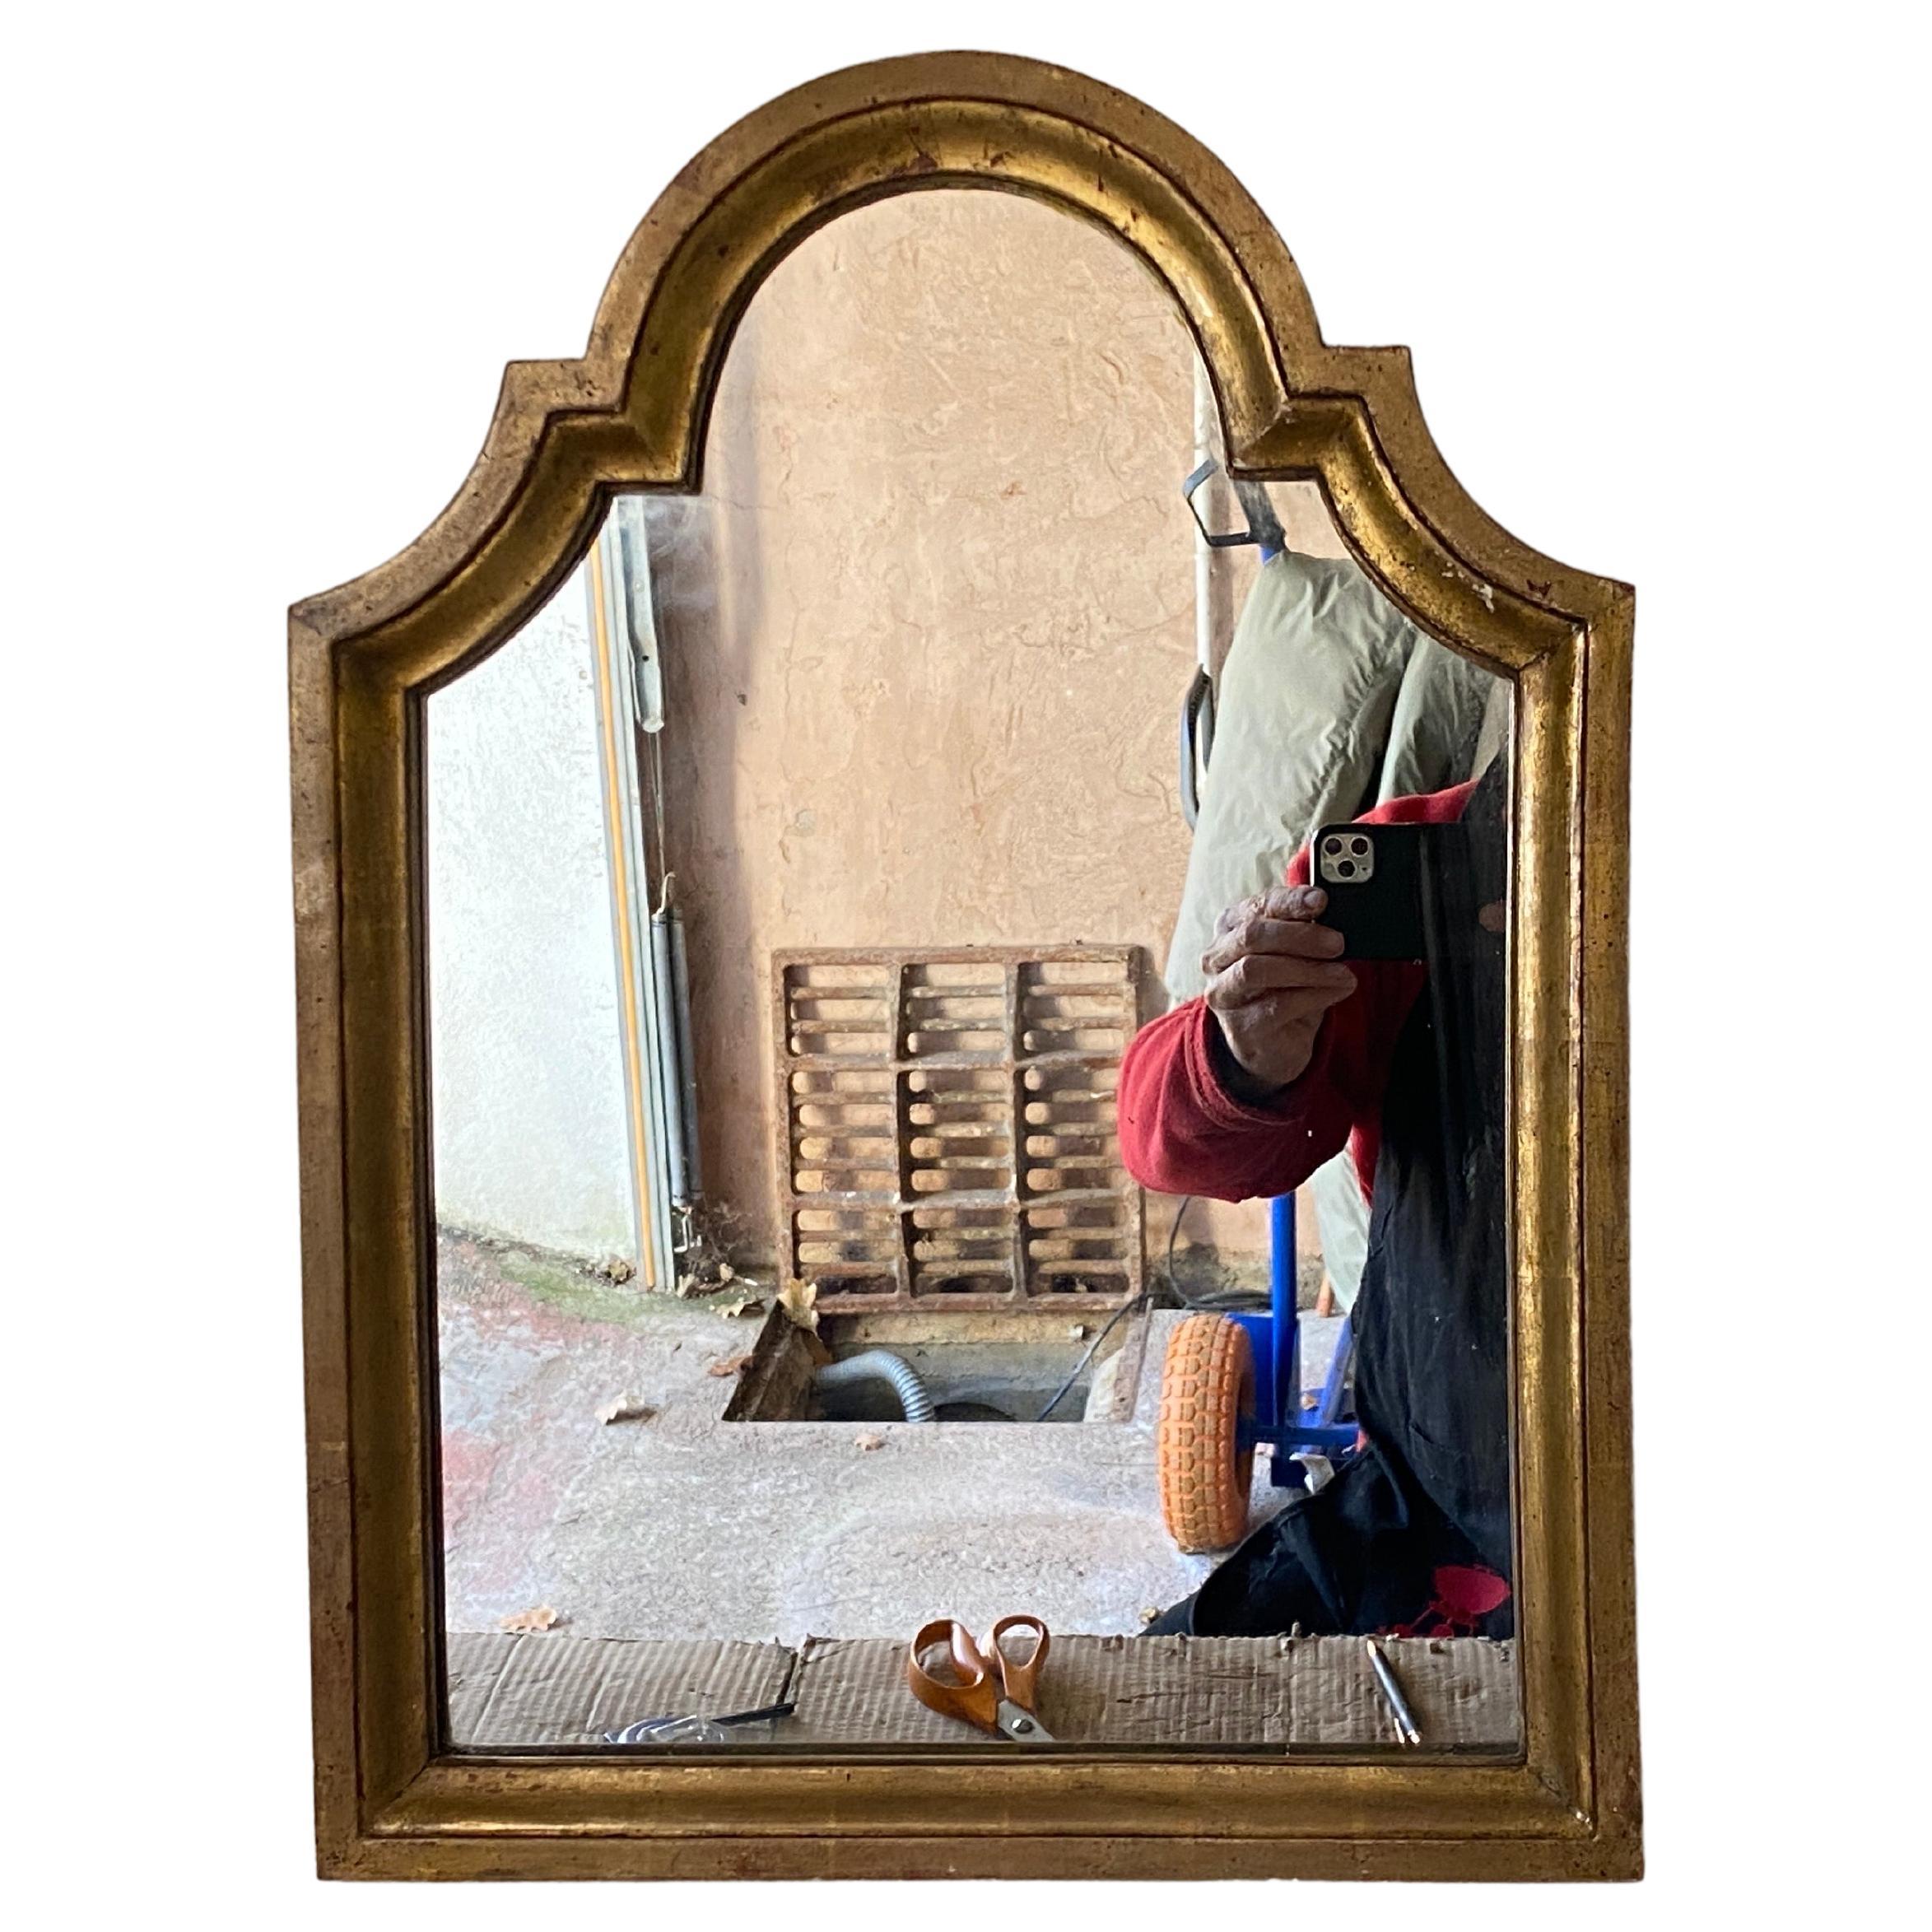 This is a wood gilt Wall mirror, in a gold color, with an old Patina. It has been made in rance during the 19th century.